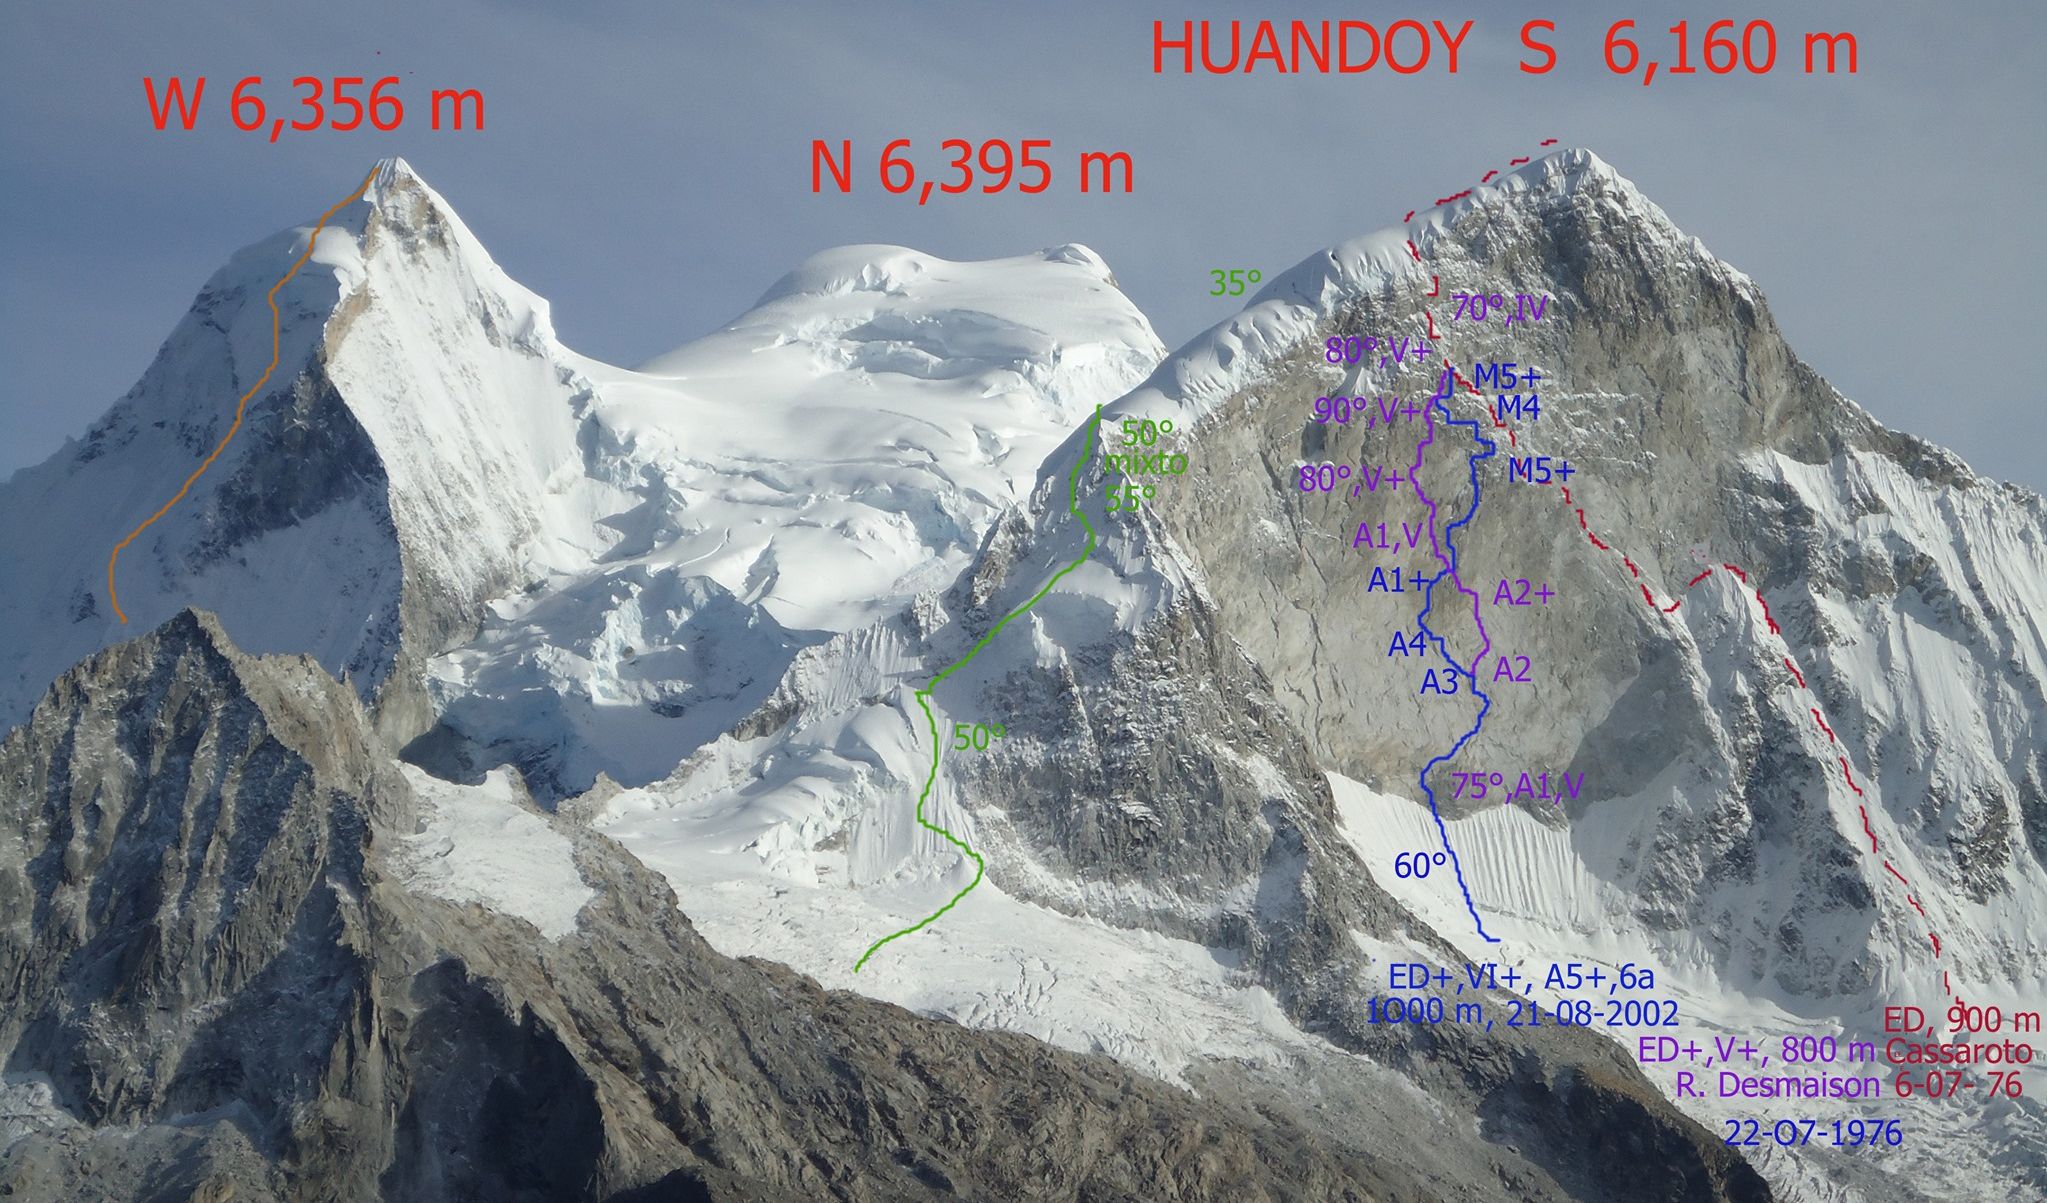 Huandoy in the Cordillera Blanca of the Andes of Peru